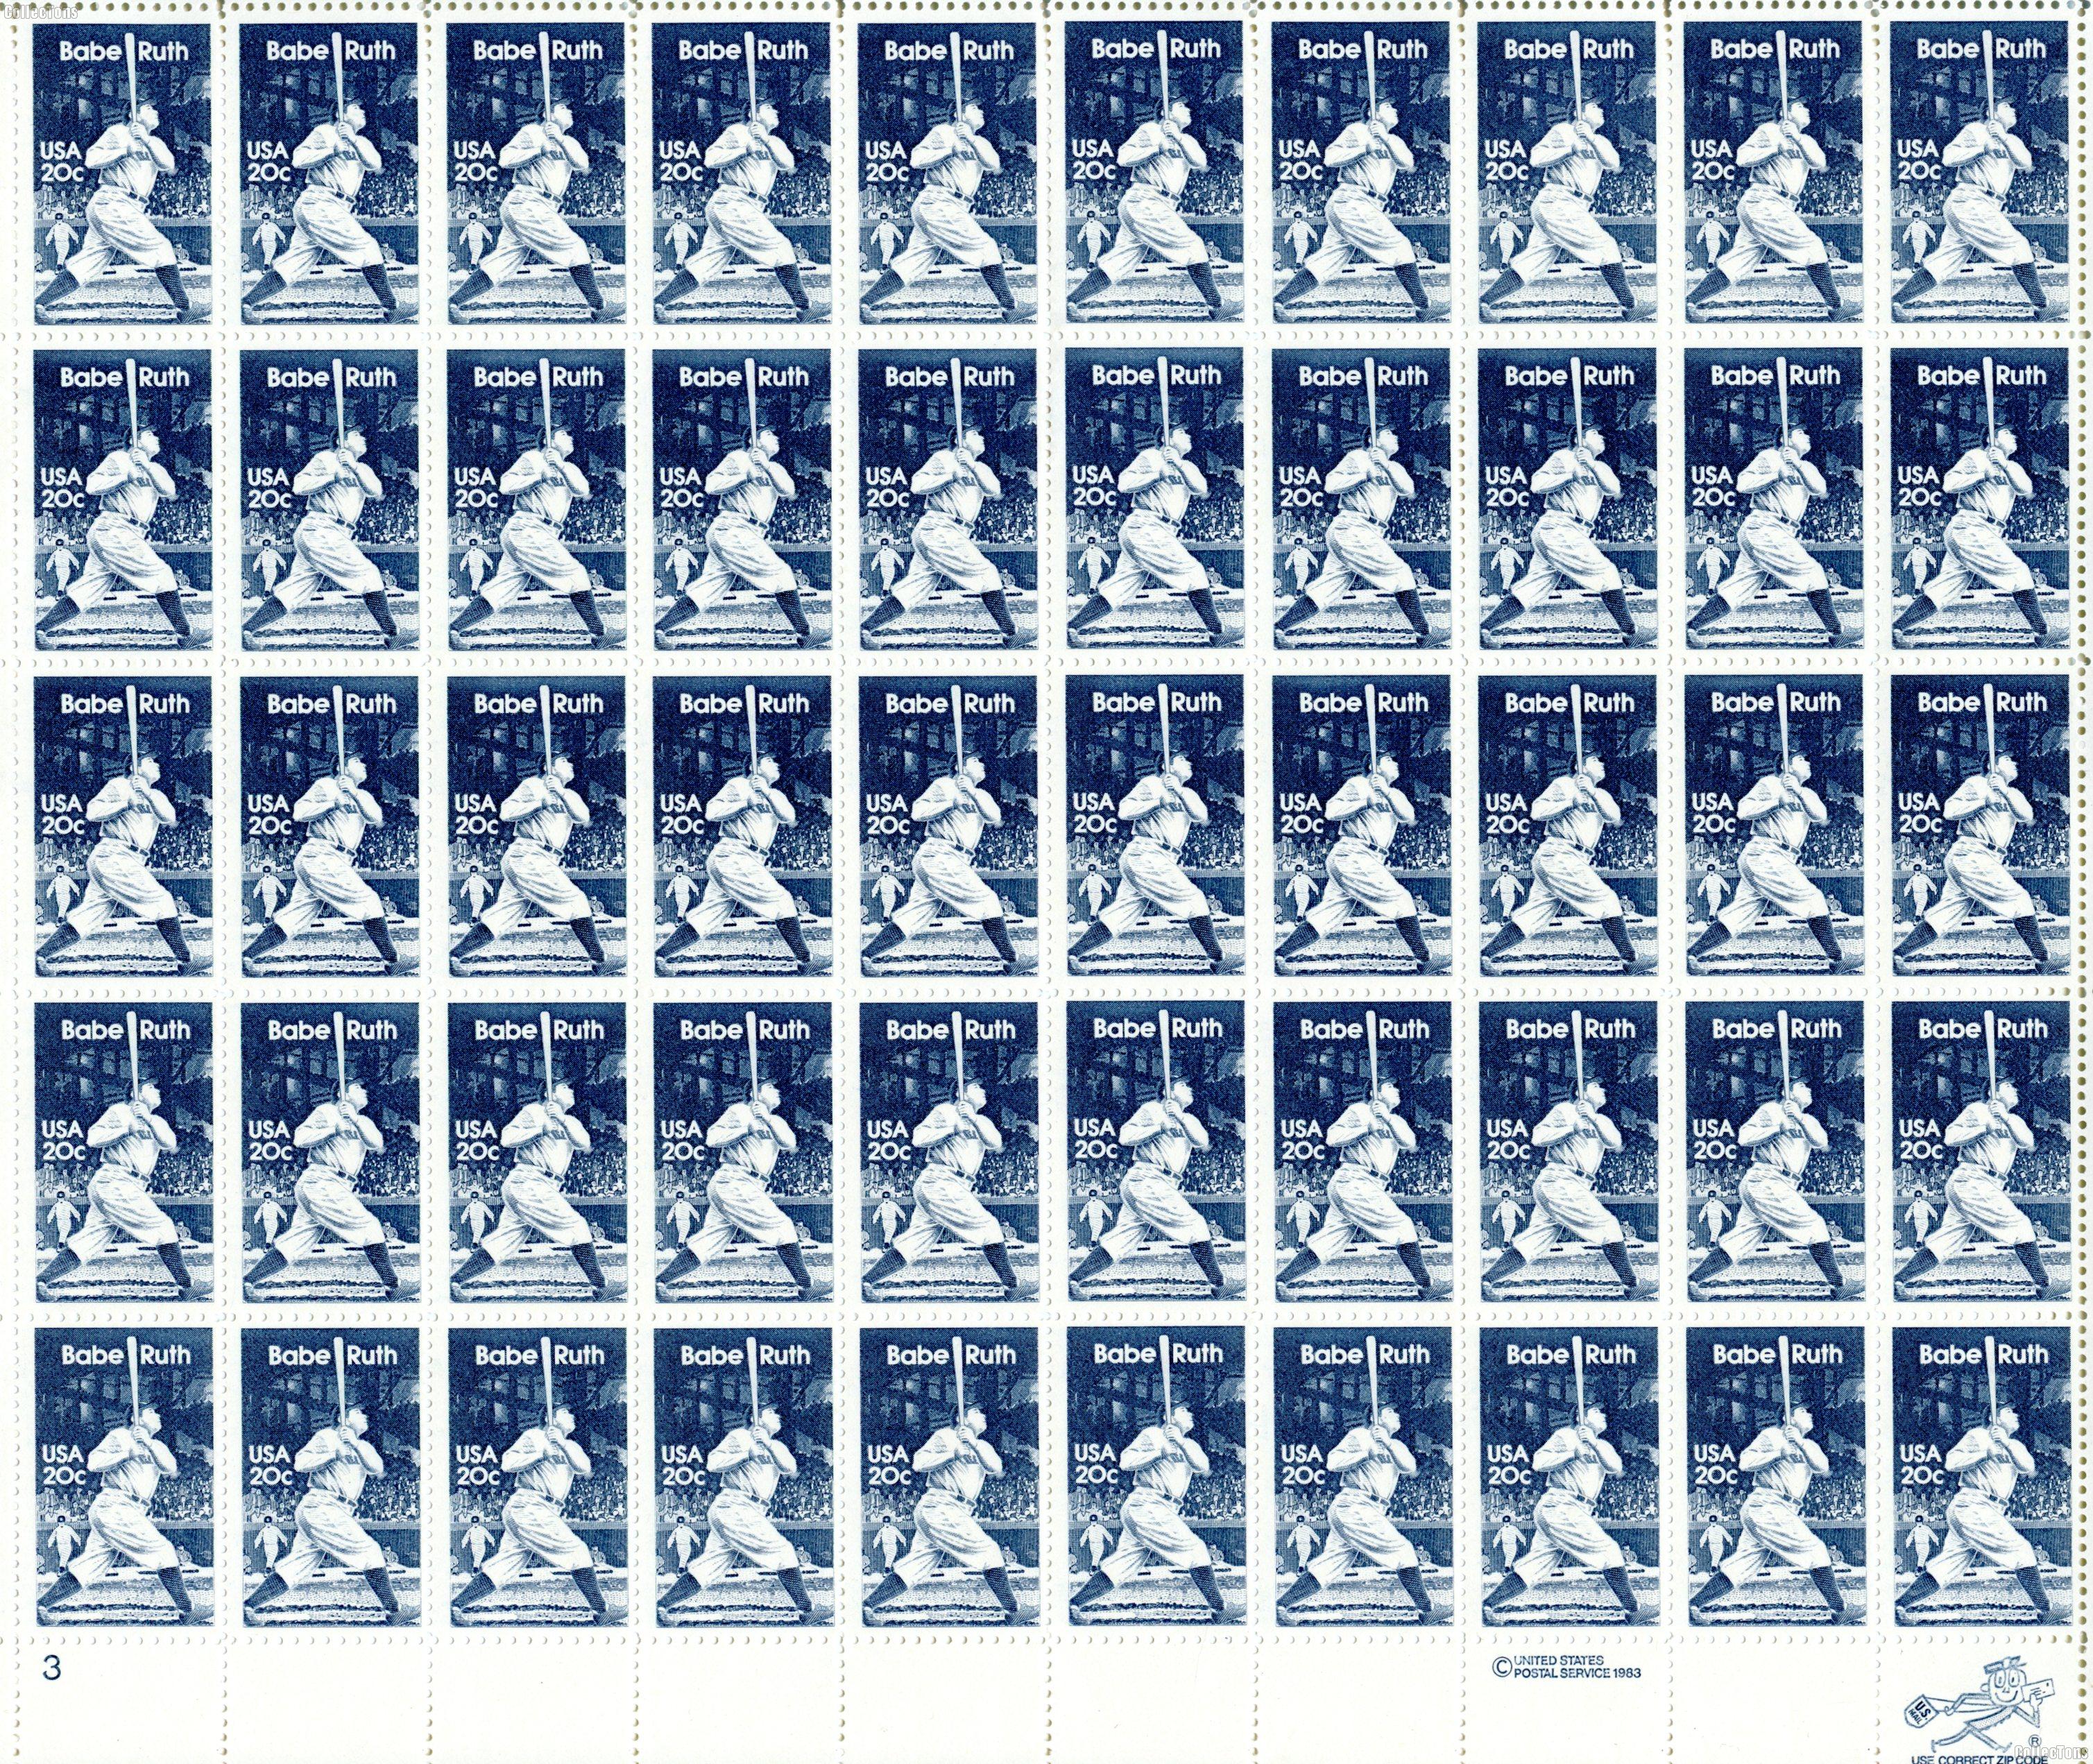 1983 Babe Ruth 20 Cent US Postage Stamp MNH Sheet of 50 Scott #2046